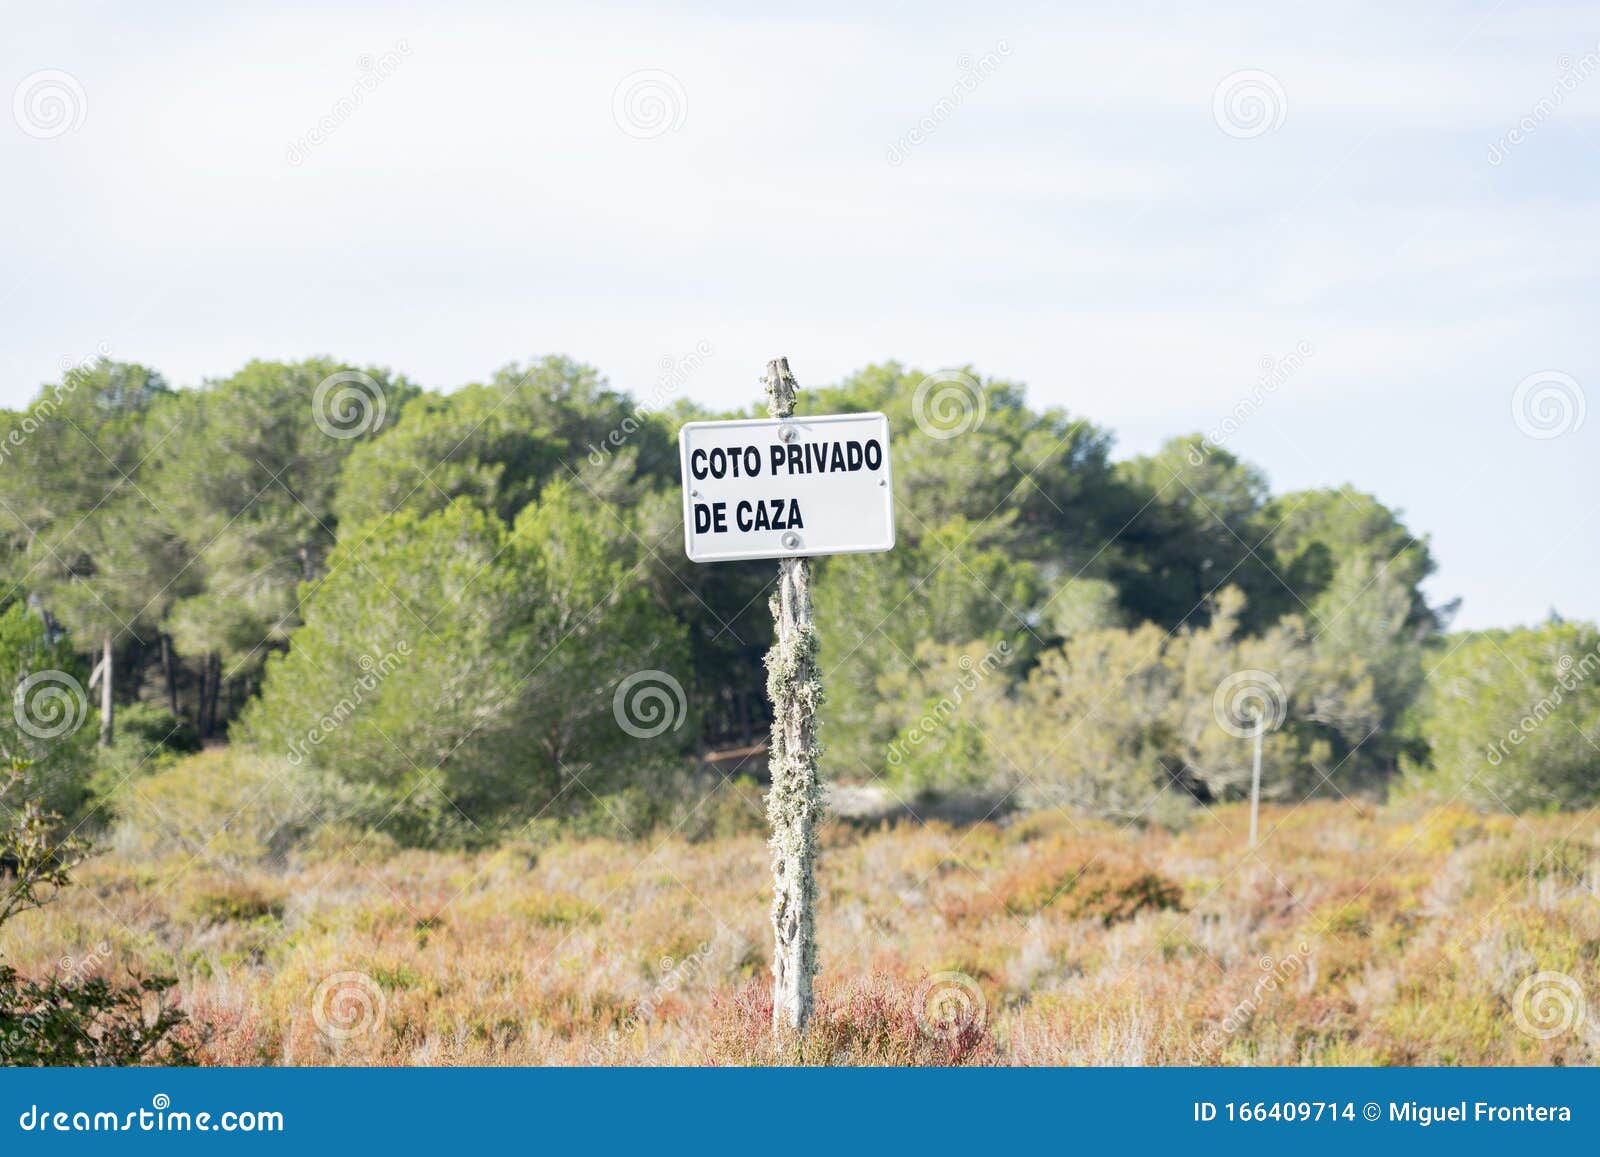 signboard private hunting ground spanish words